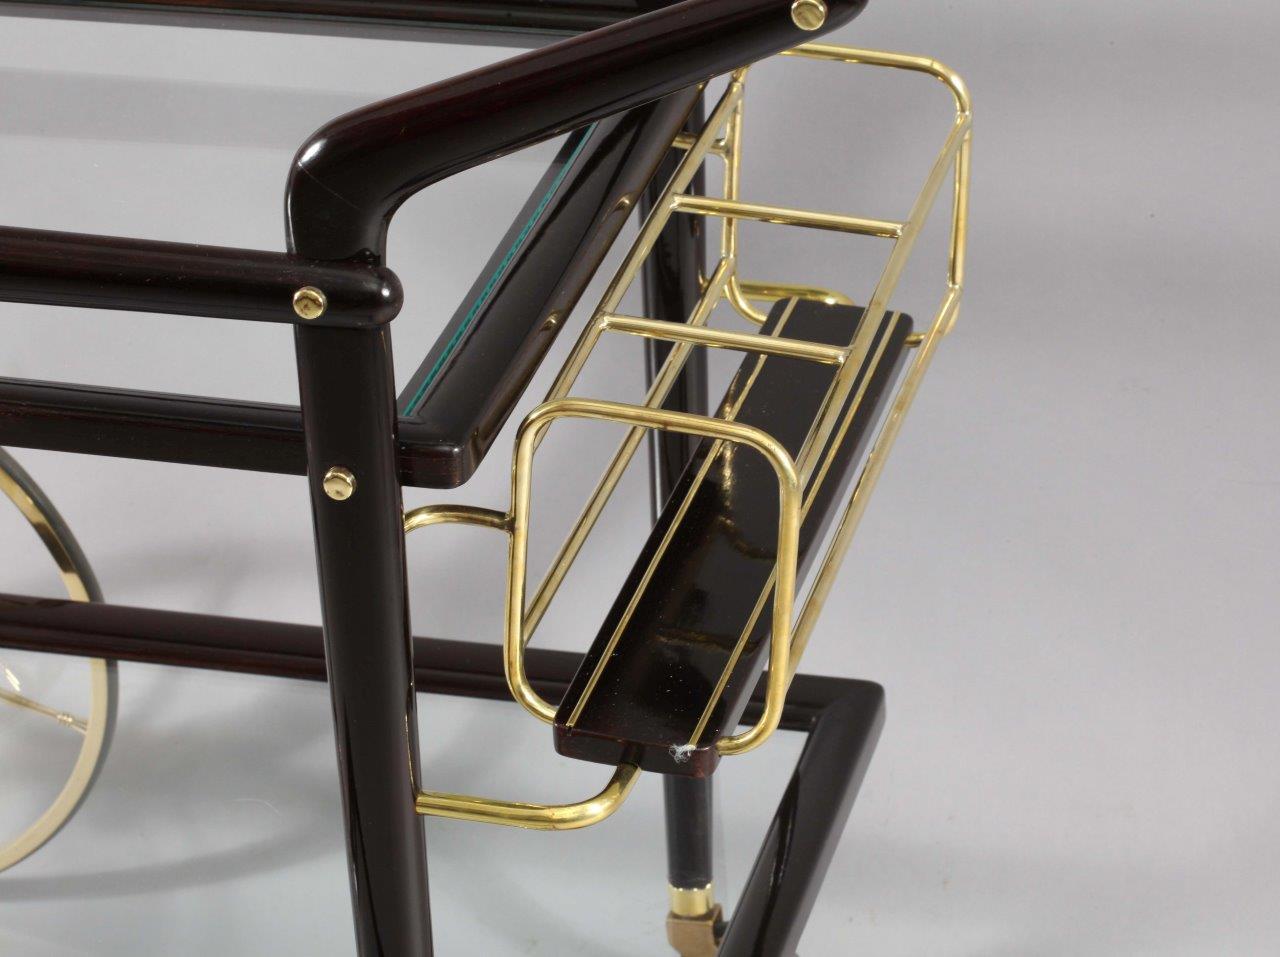 Bar trolley
Designed: Cesare Lacca
Italy, 1950
Movable tray, bottle holder
Wood, brass.